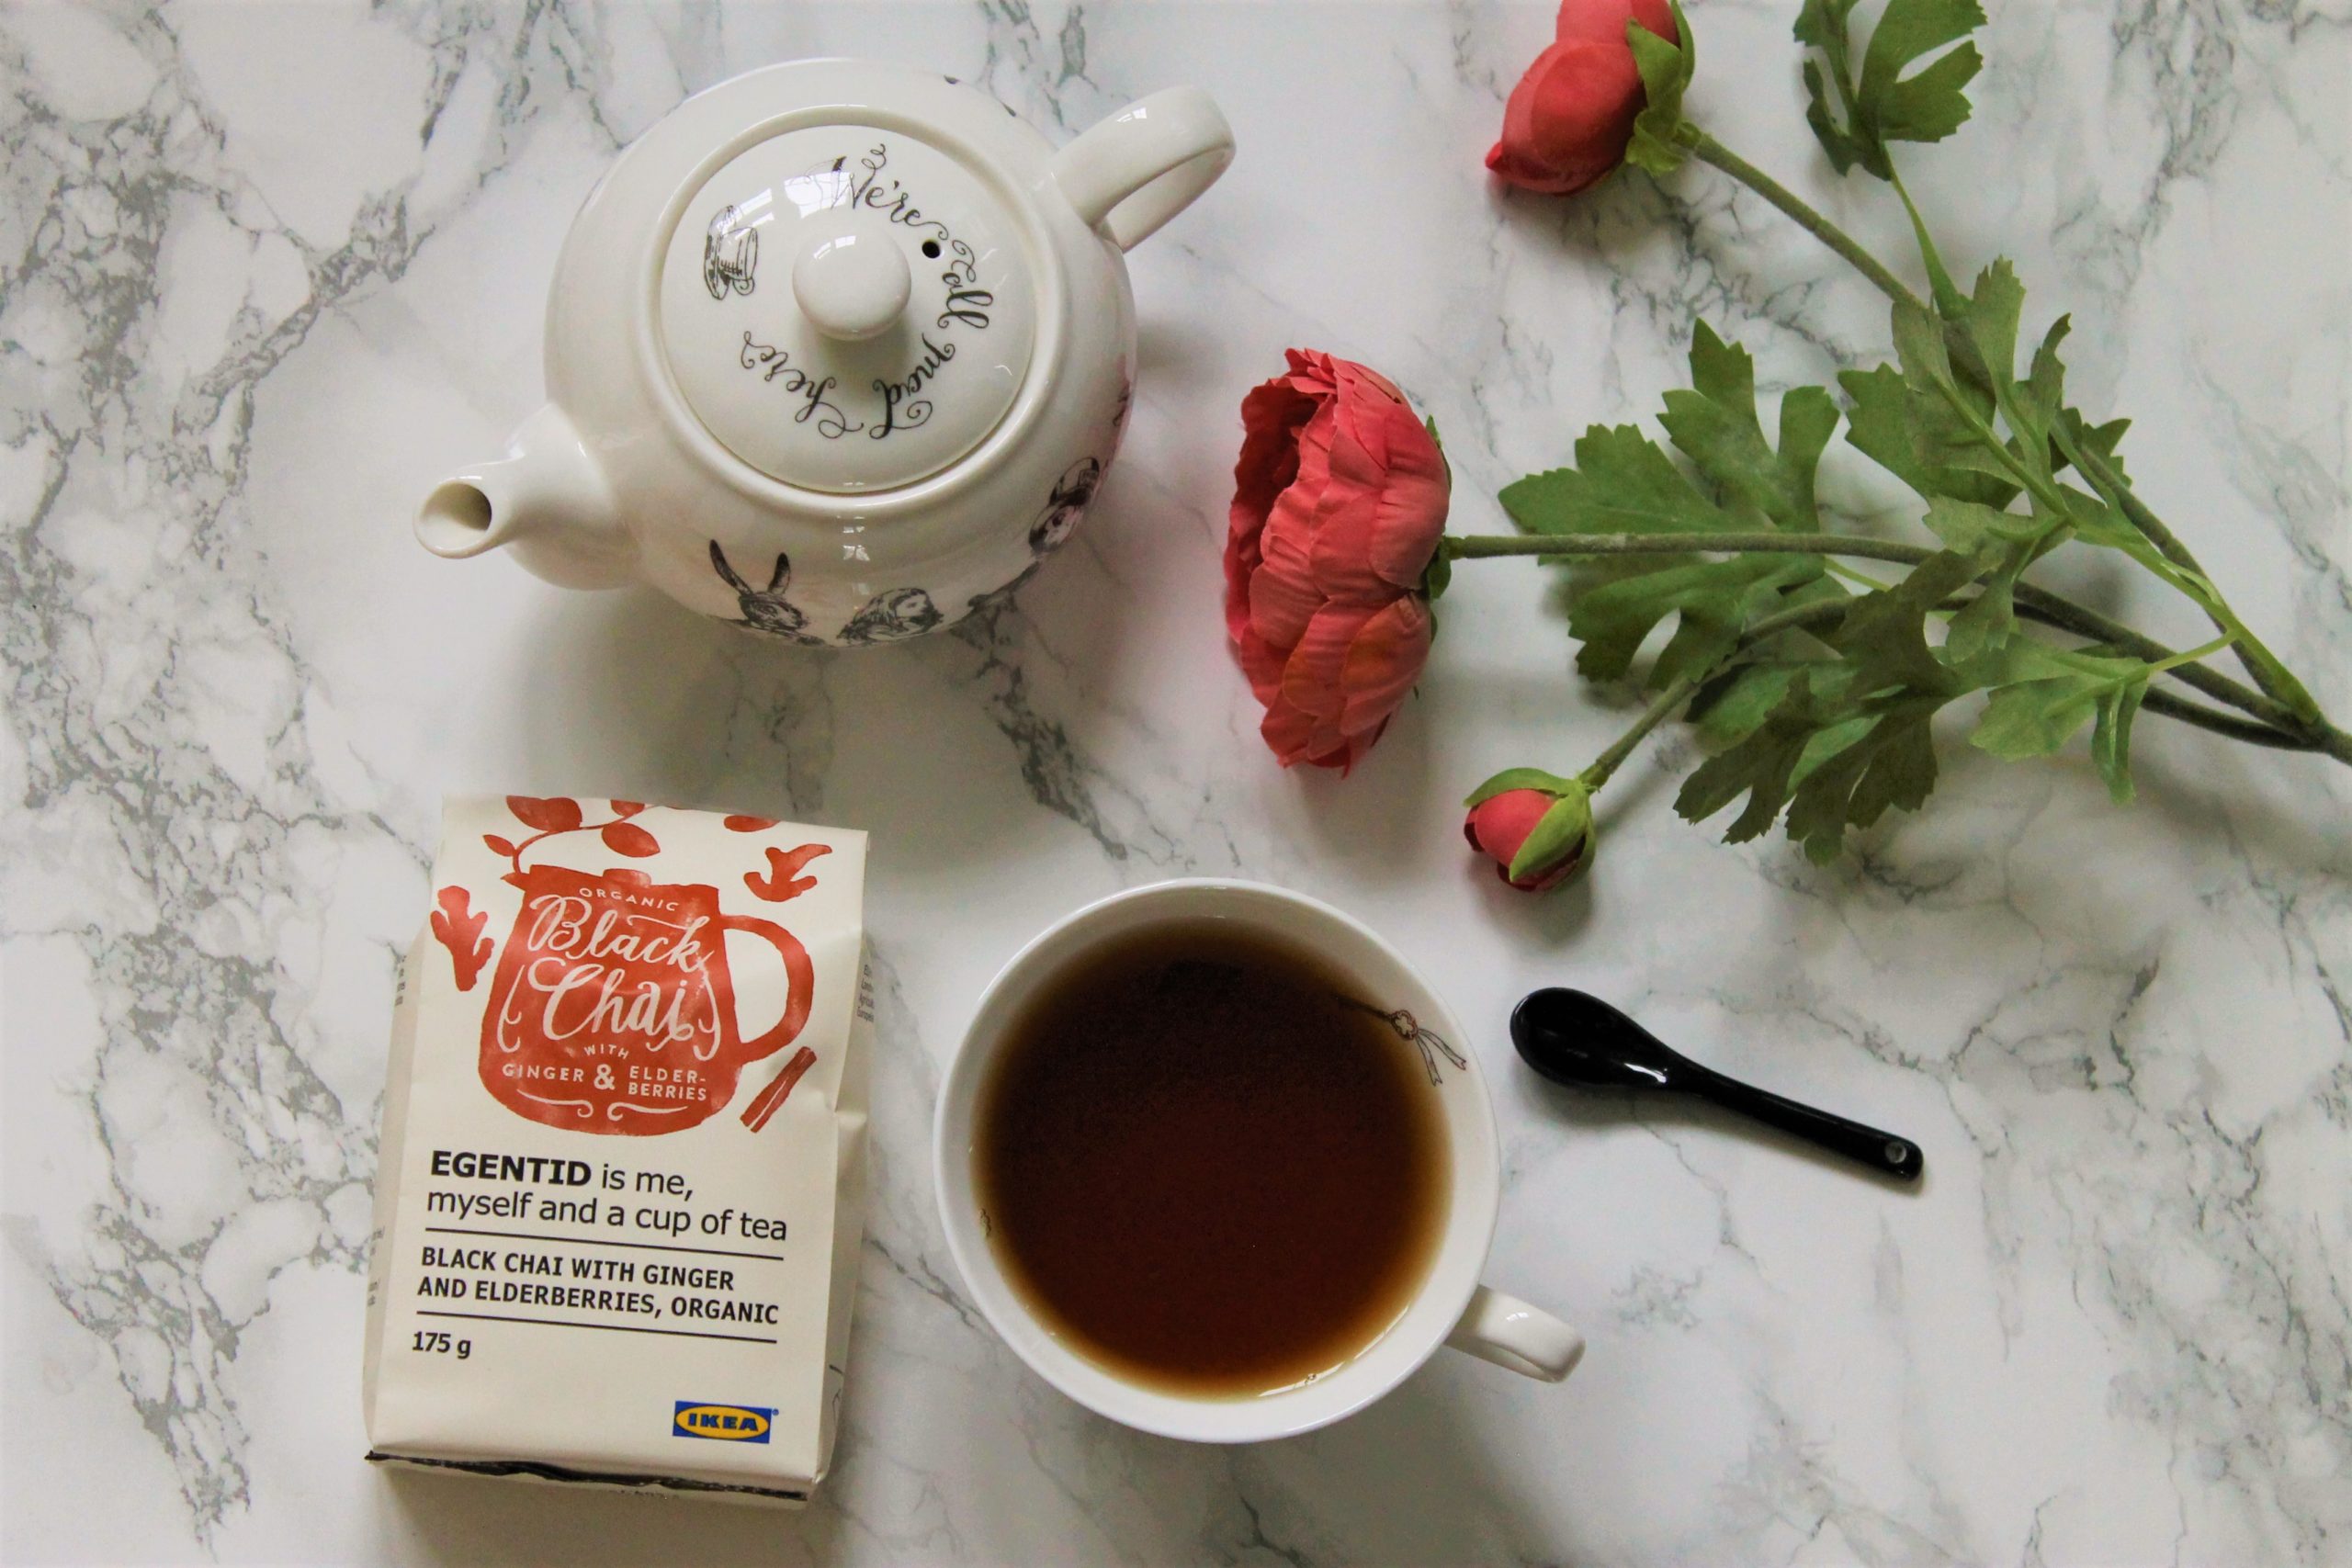 IKEA Black Chai with Ginger and Elderberries Tea Review